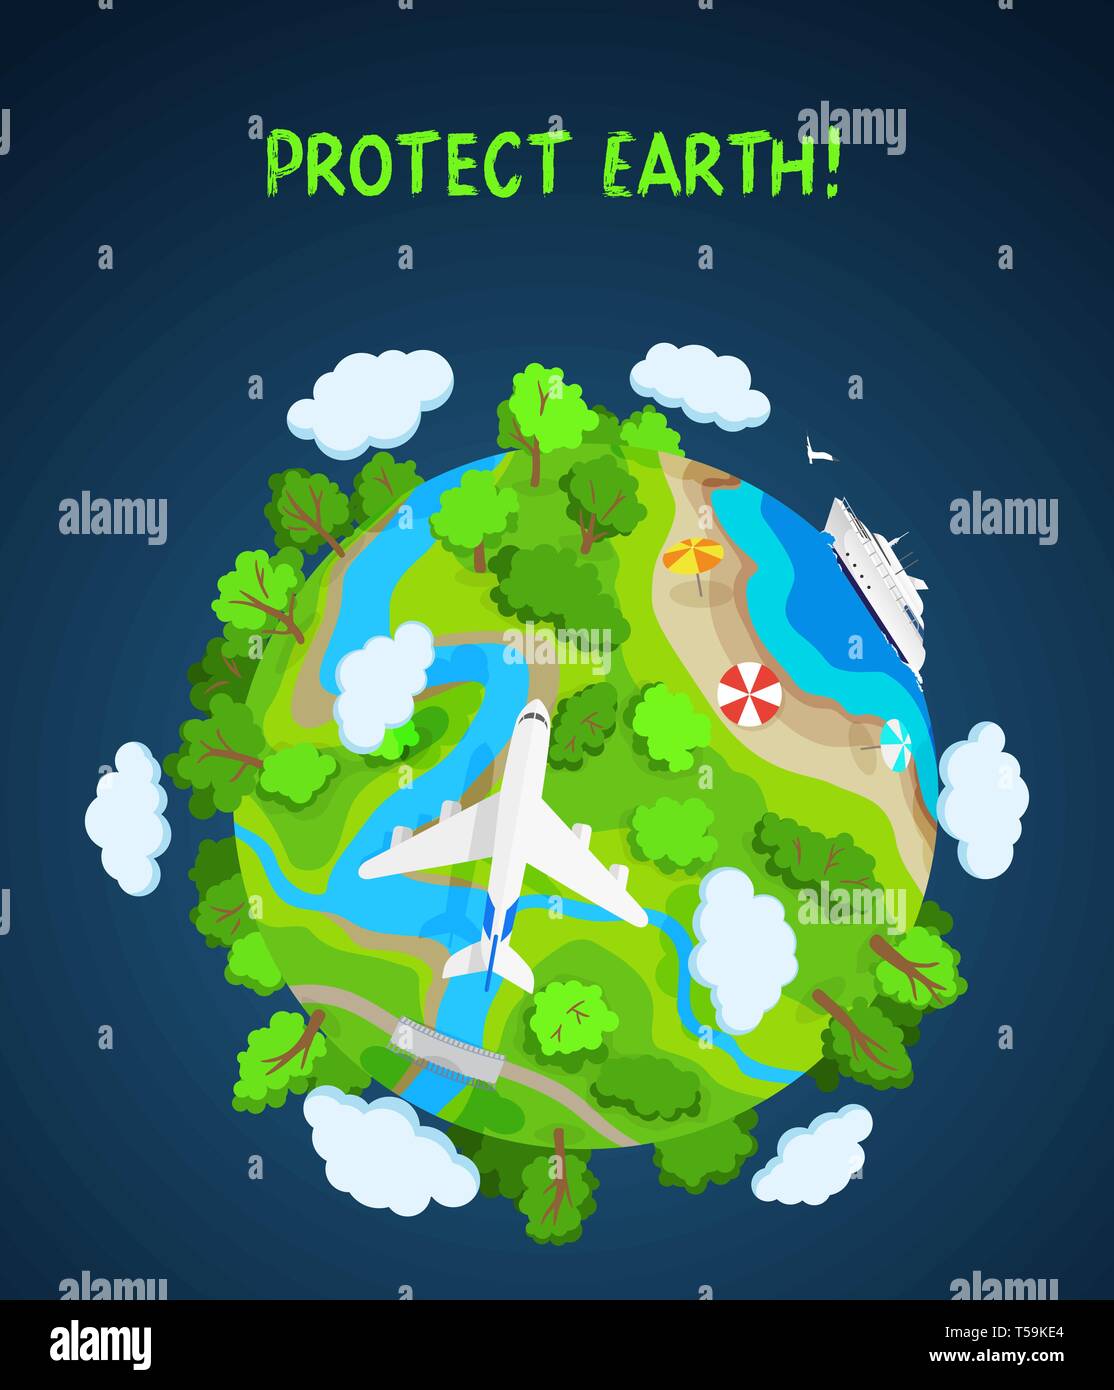 Earth protect concept, planet globe with trees, rivers and clouds Stock Vector